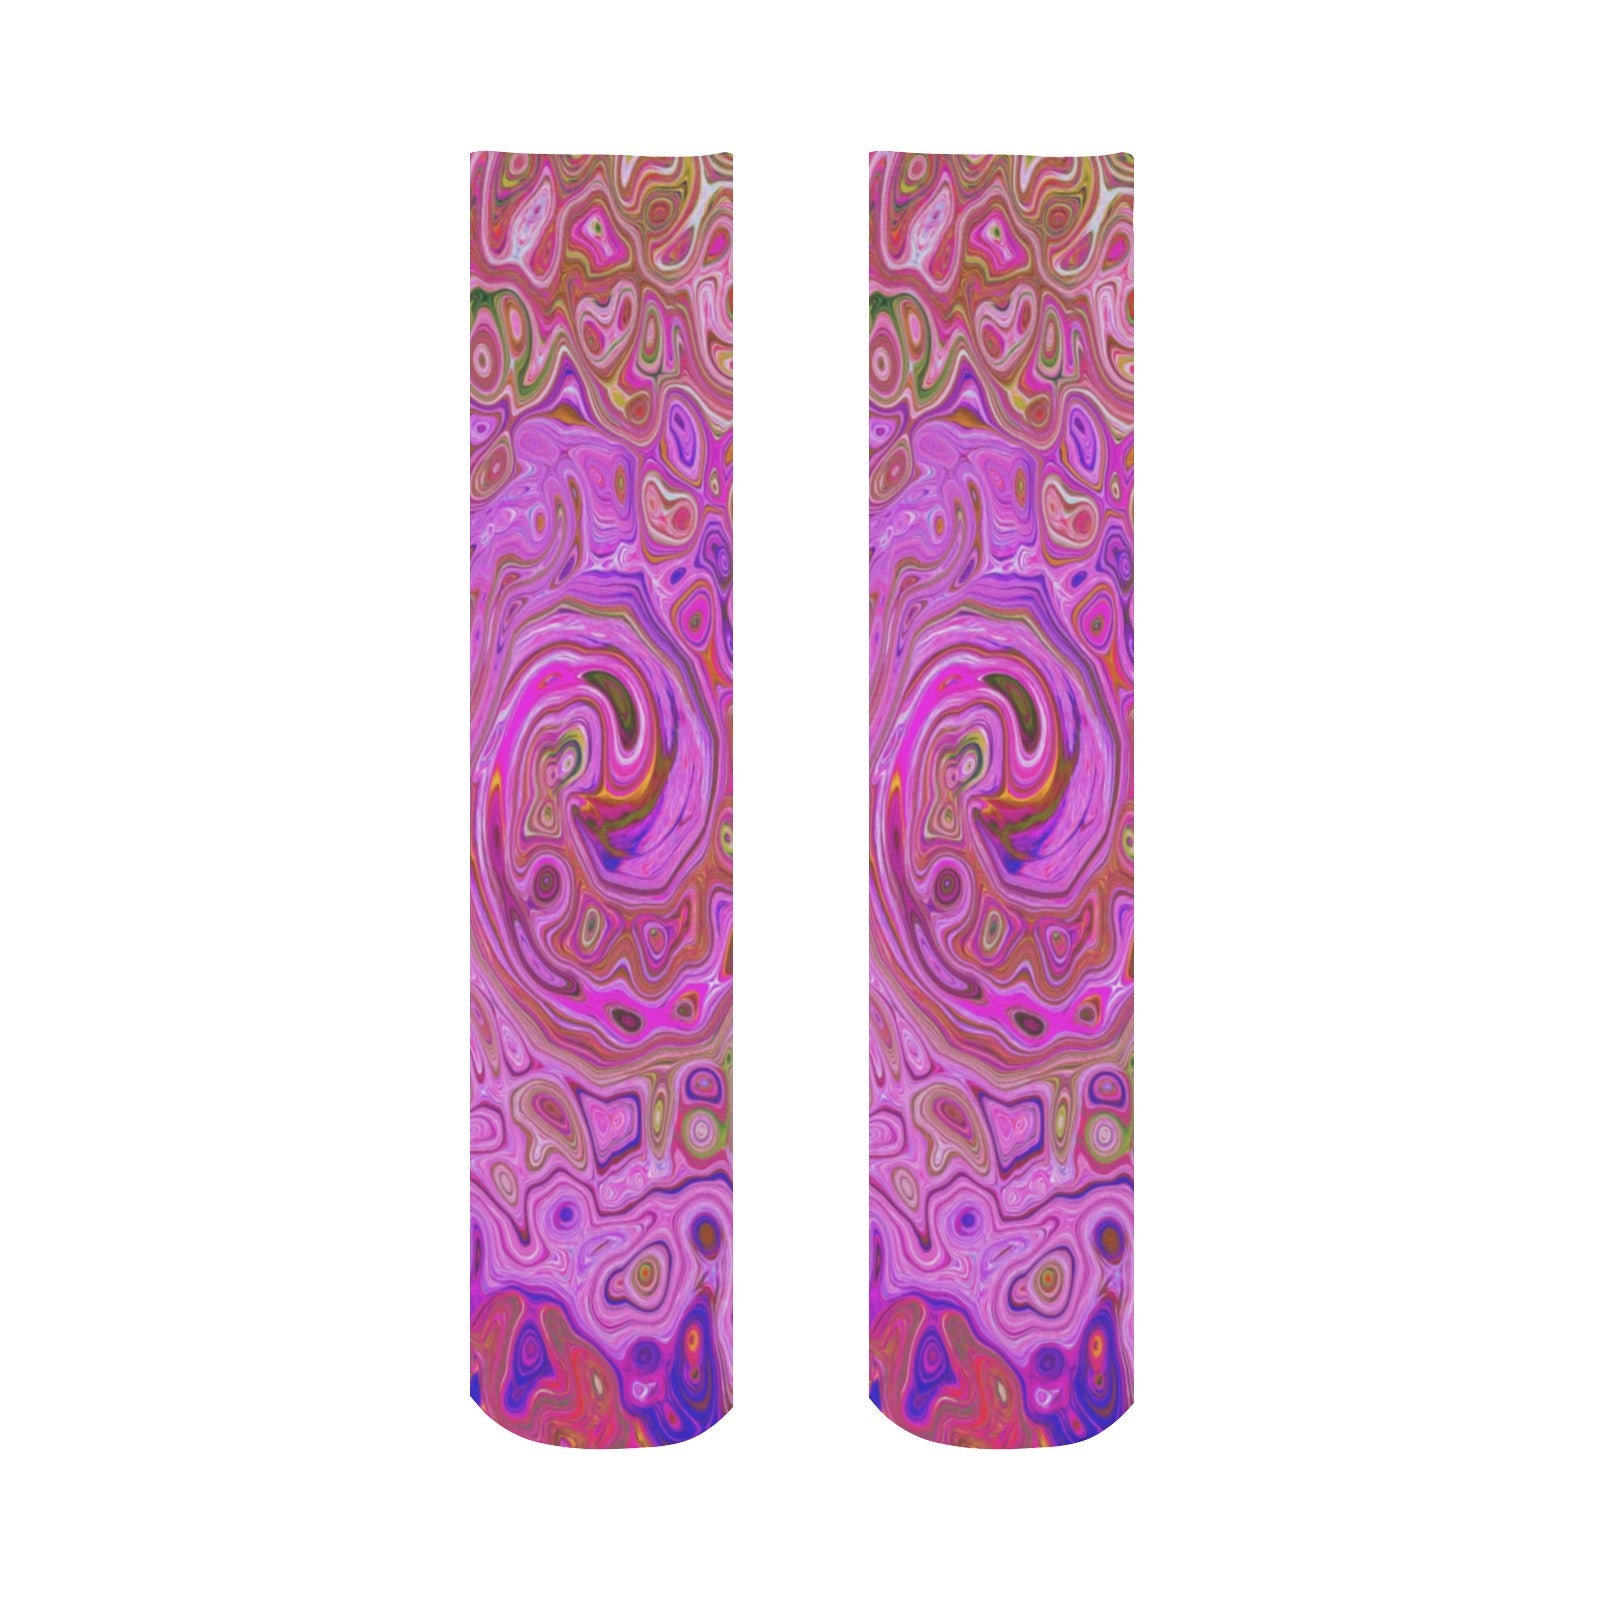 Socks for Women, Hot Pink Marbled Colors Abstract Retro Swirl